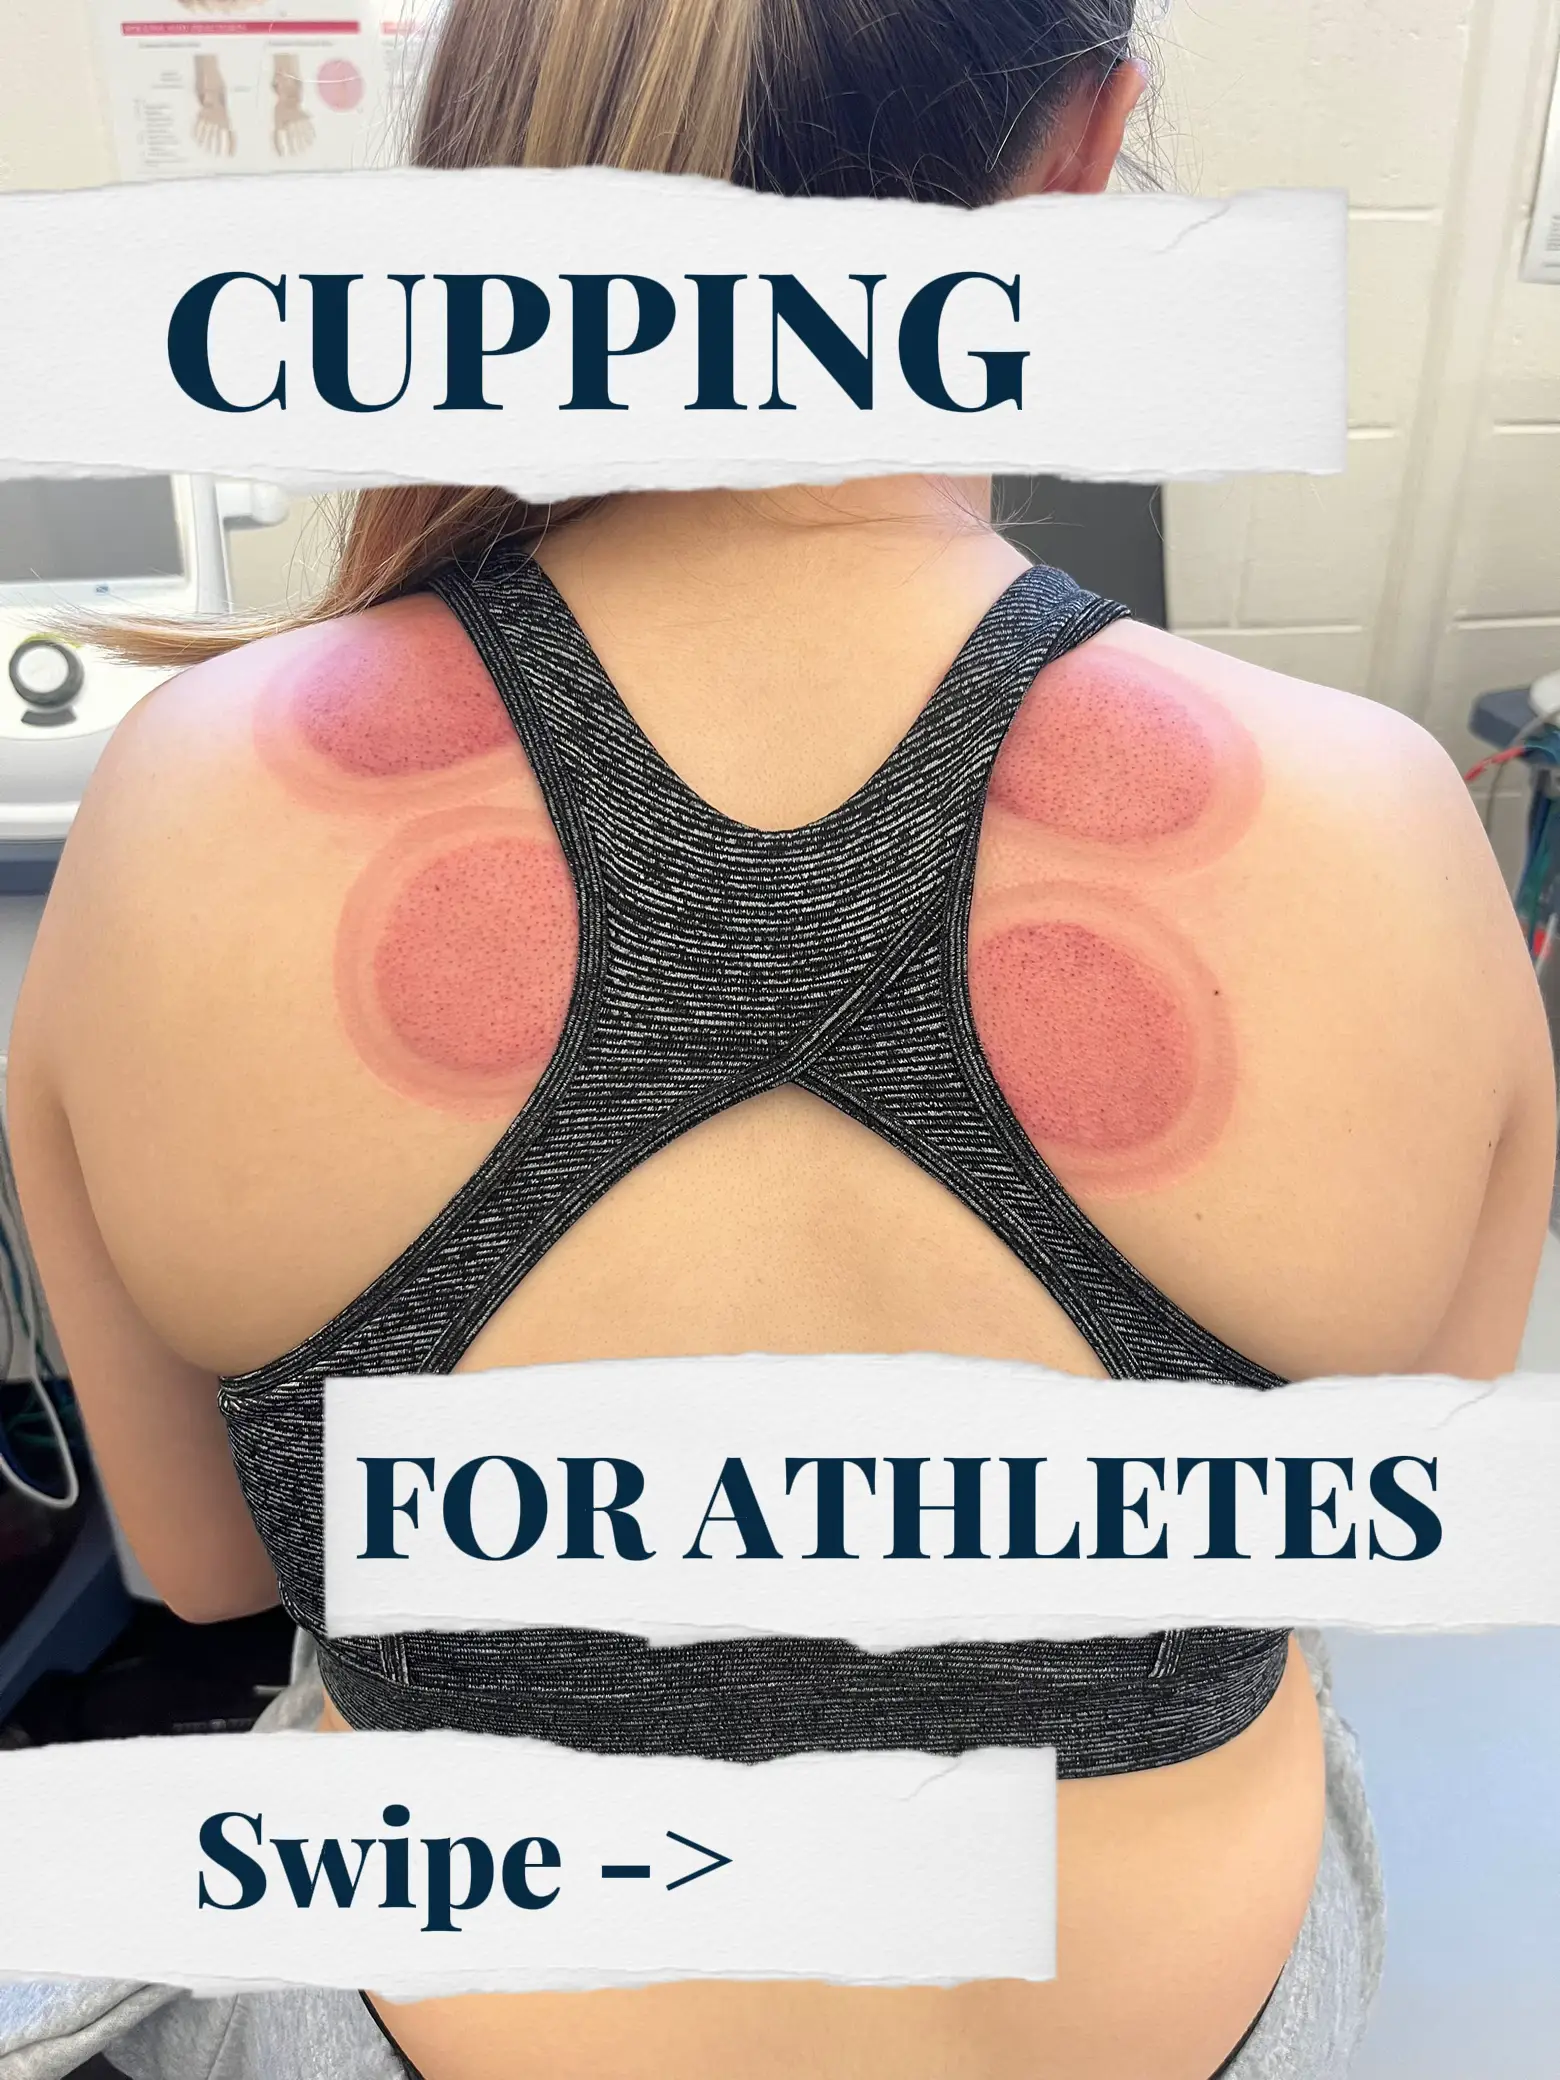 Dry Cupping Benefits - Lemon8 Search